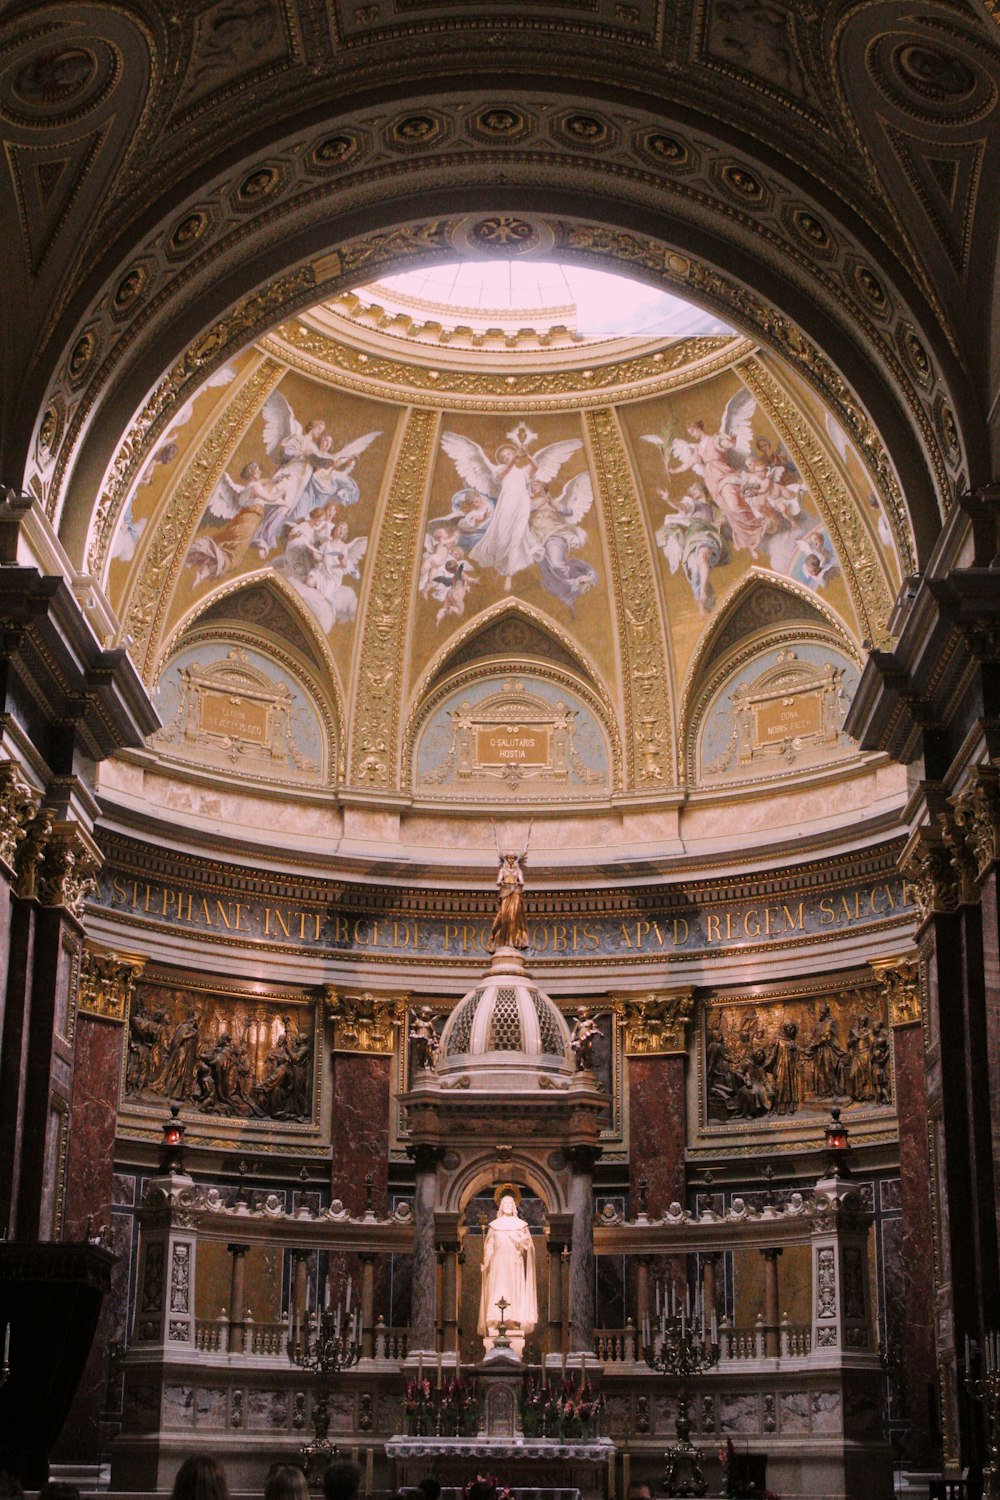 a large ornate ceiling with statues